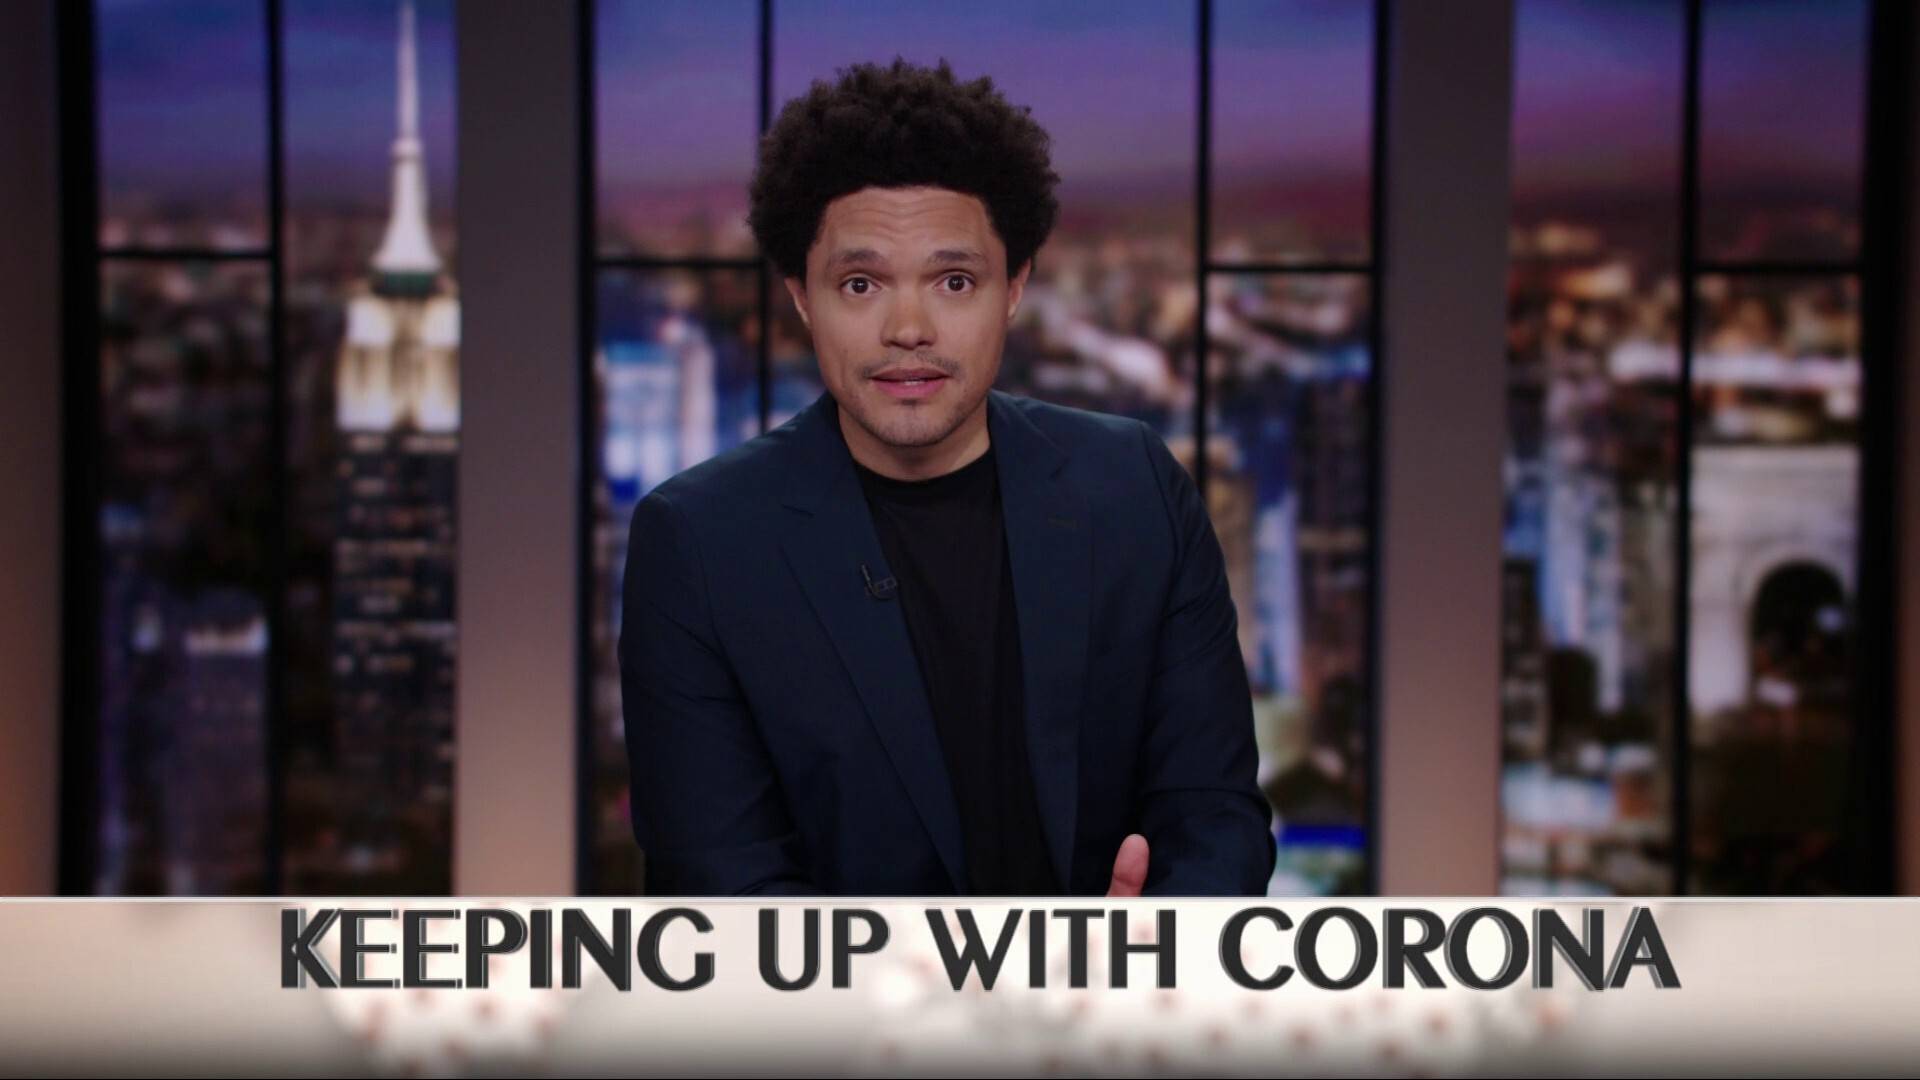 Keeping Up with the Coronavirus - The CDC Sows Confusion - The Daily Show  with Trevor Noah (Video Clip)